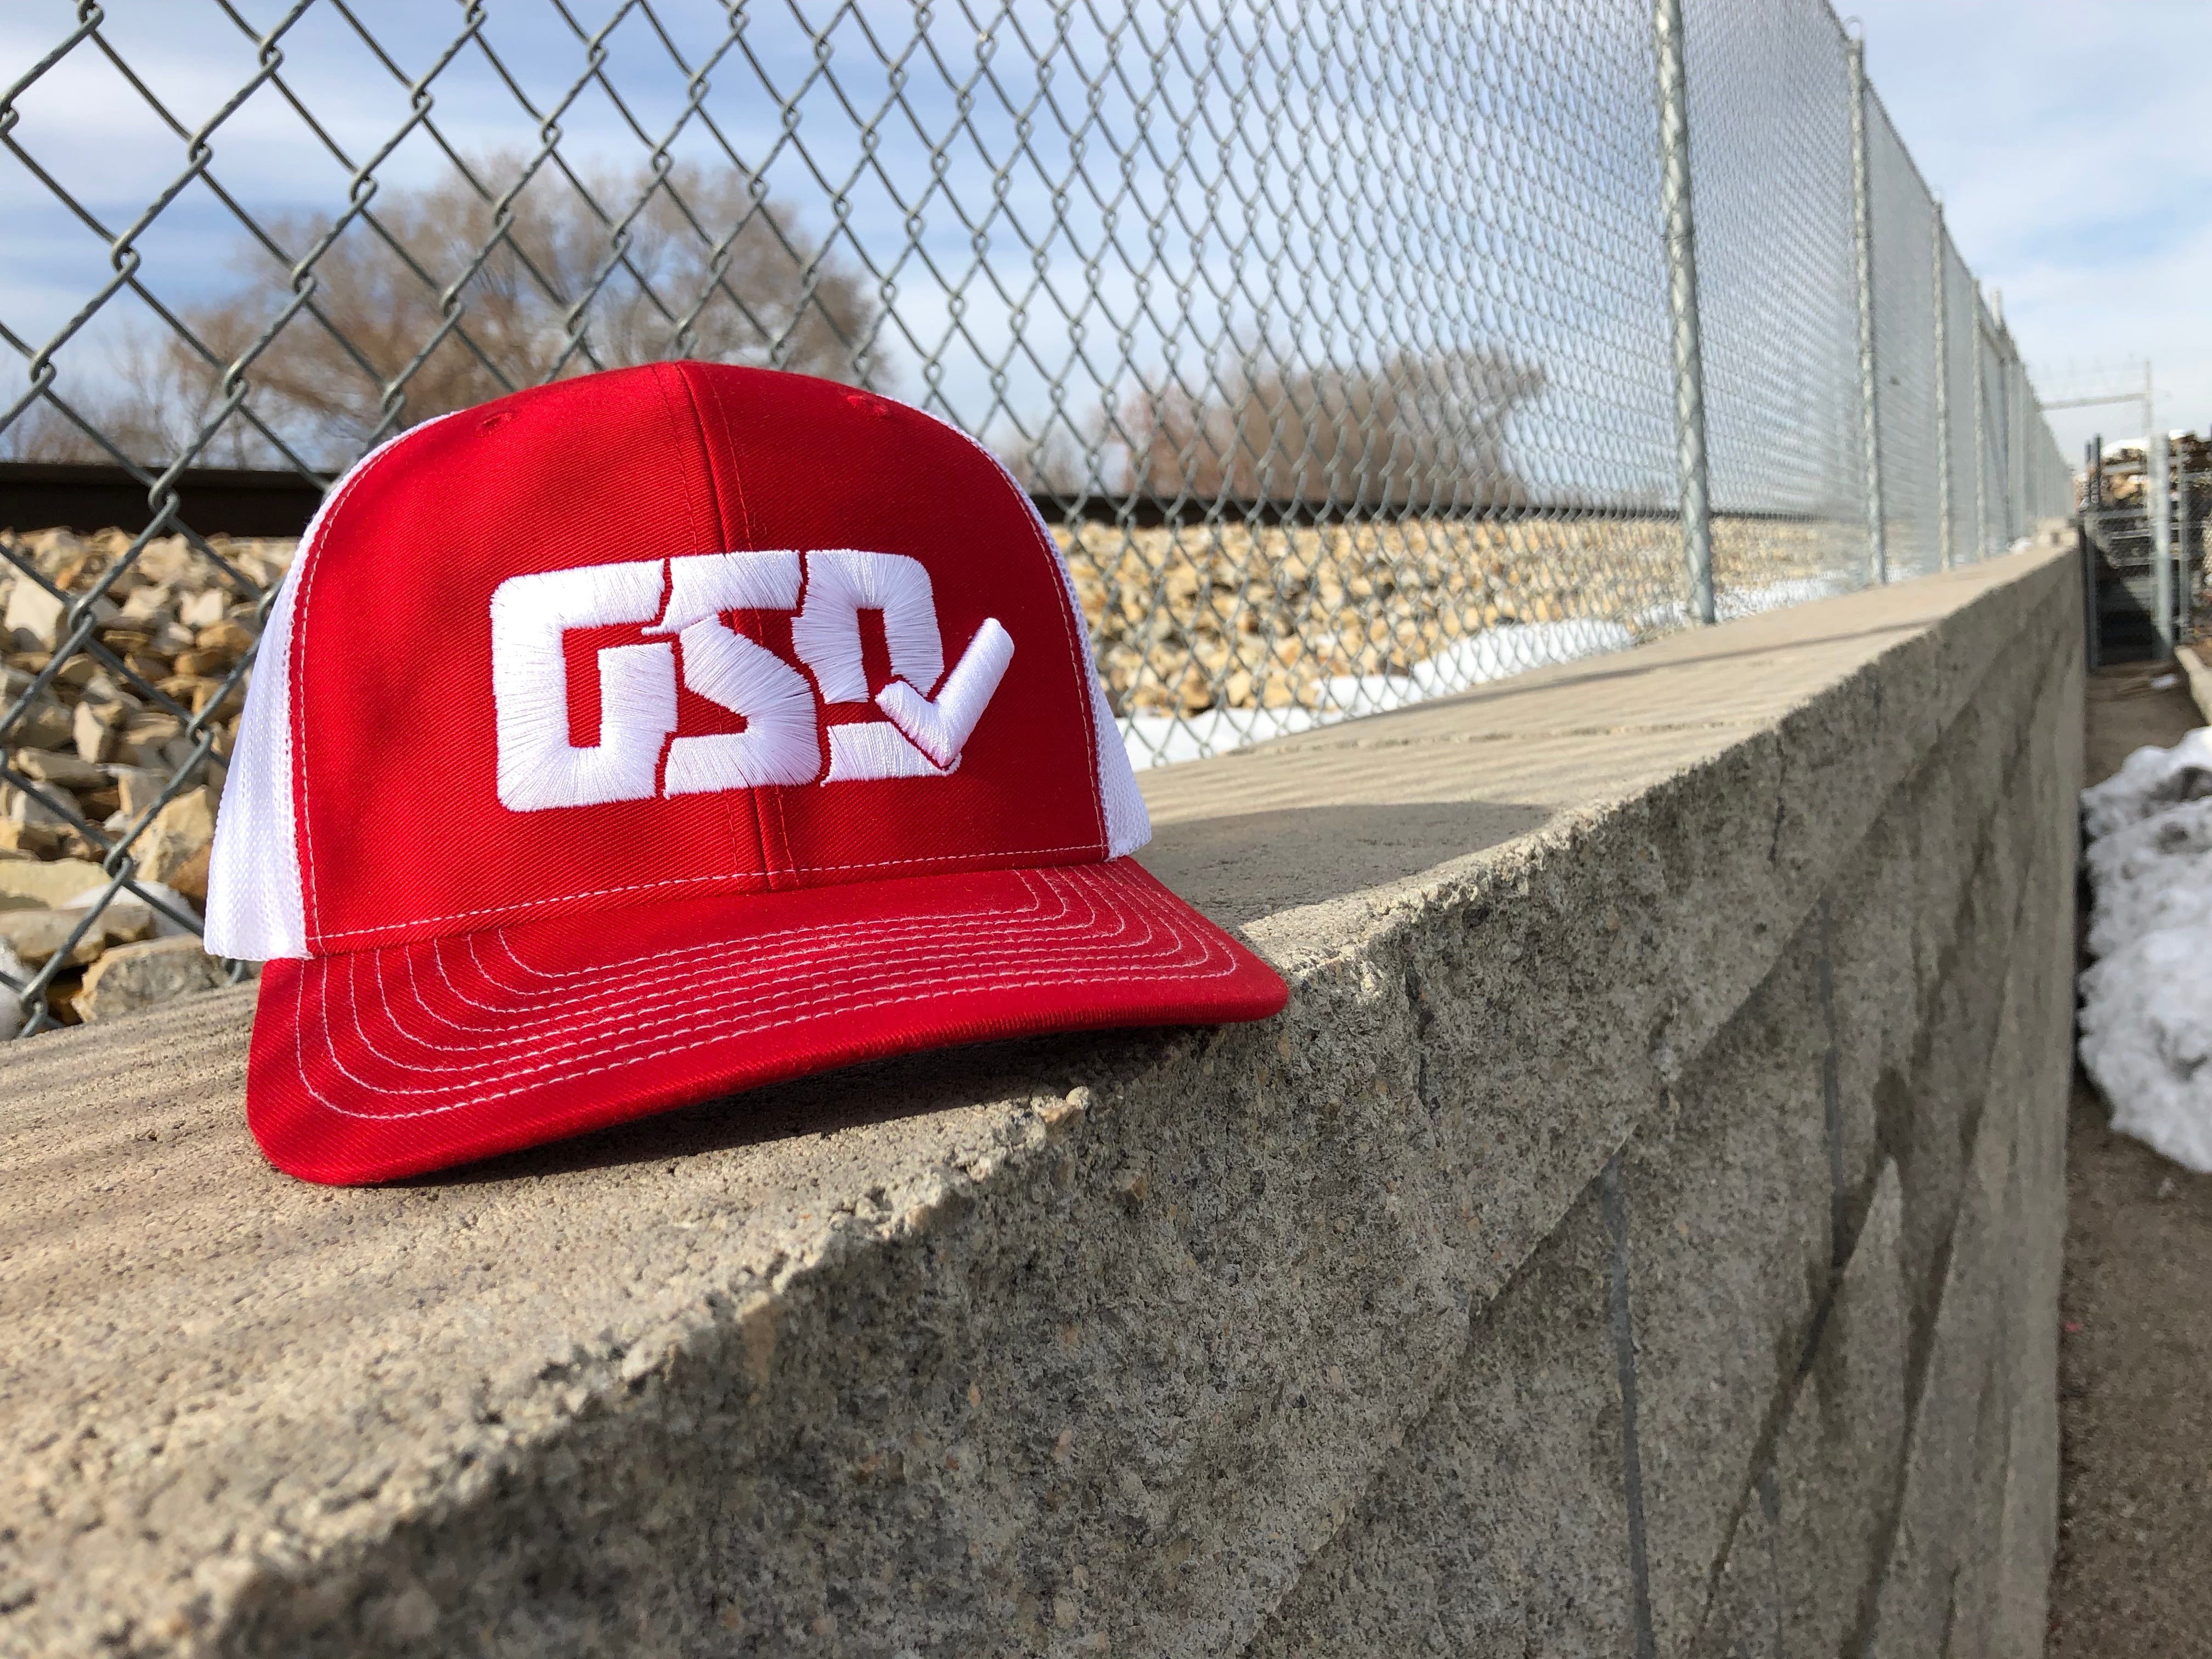 GSD CLASSIC Mesh Snap Back Hat - Red / White - “Pete Rose”